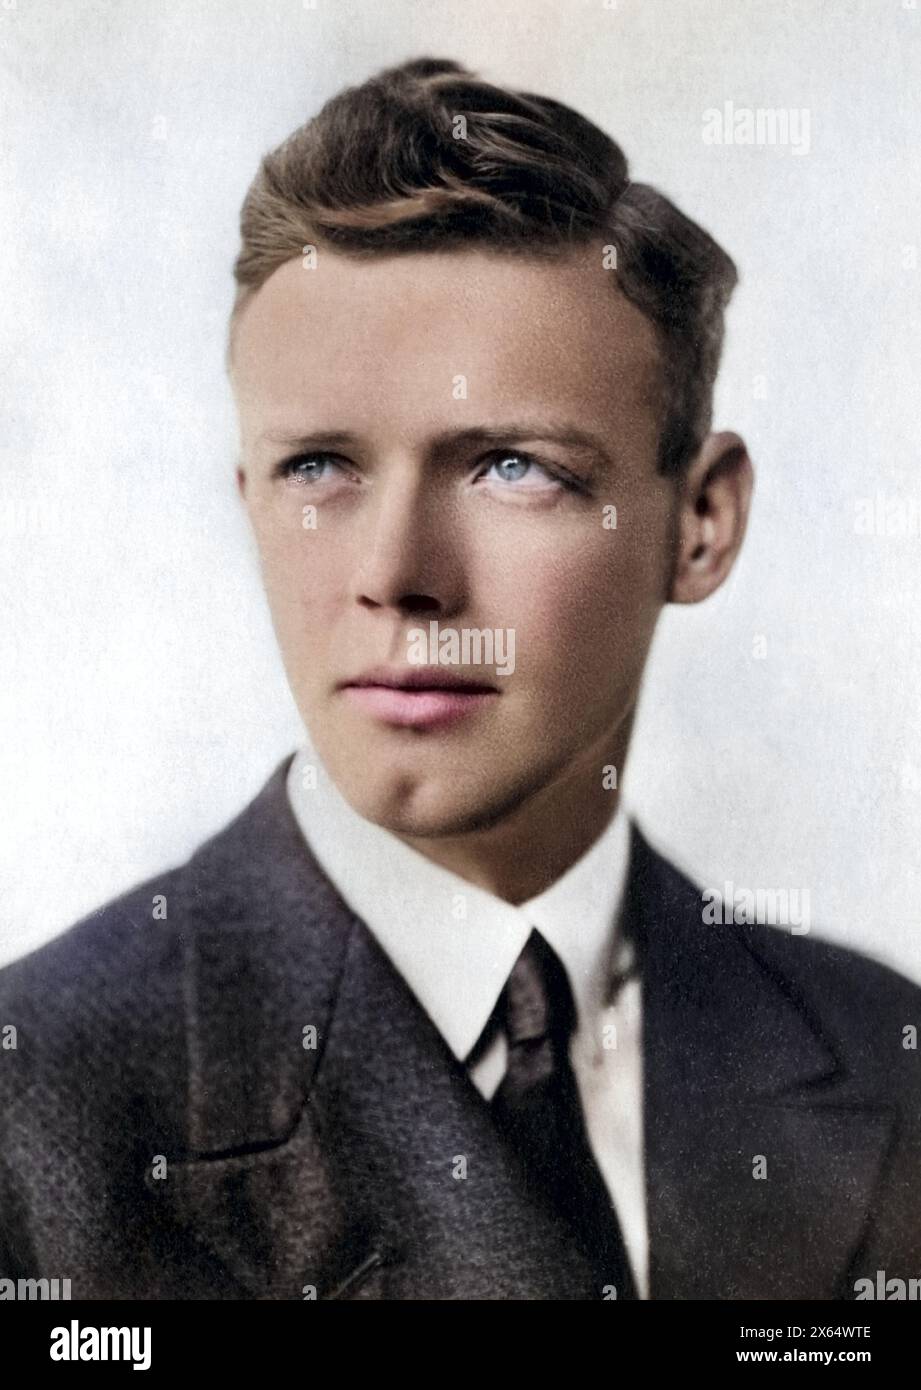 Lindbergh, Charles, 4.2.1902 - 26.8.1974, American pilot, portrait, circa 1925, ADDITIONAL-RIGHTS-CLEARANCE-INFO-NOT-AVAILABLE Stock Photo